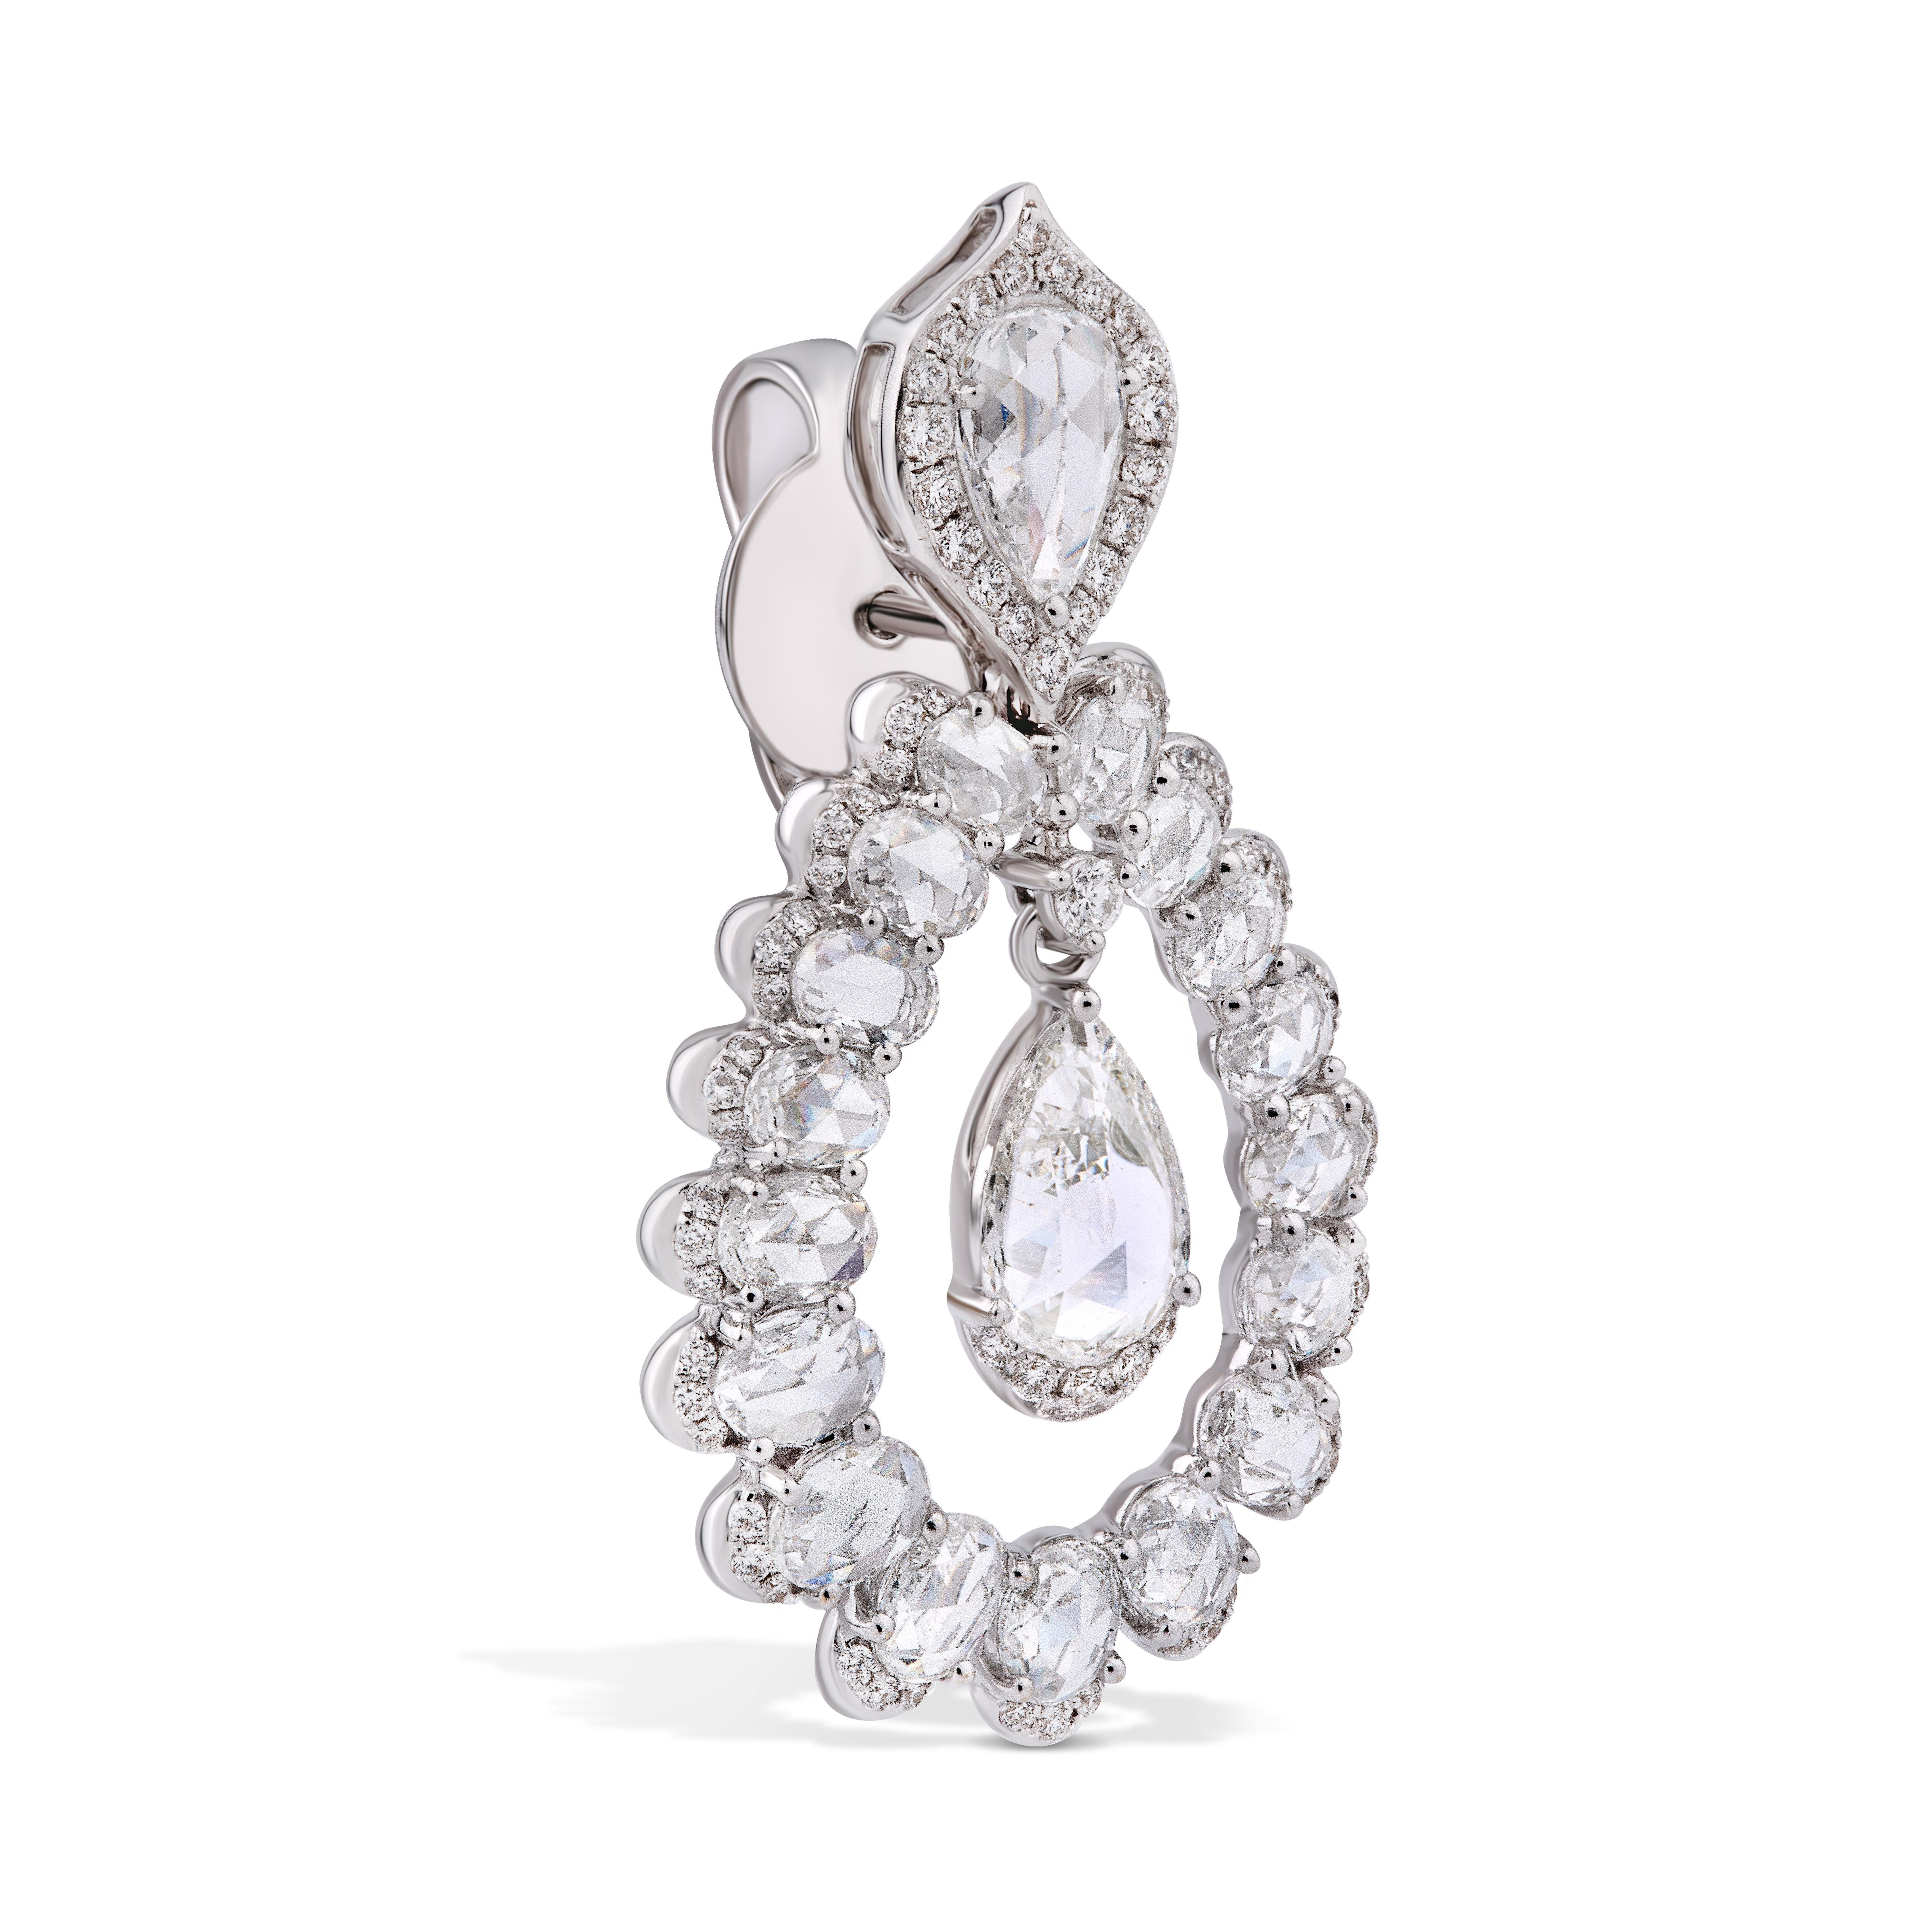 Inspired by the arches of Persian palaces, these elegant earrings are comprised of 34 oval rose-cut diamonds curving around two suspended pear-shaped rose-cut diamonds of 0.39cts each. 152 micro pave set round brilliant cut diamonds, add to their